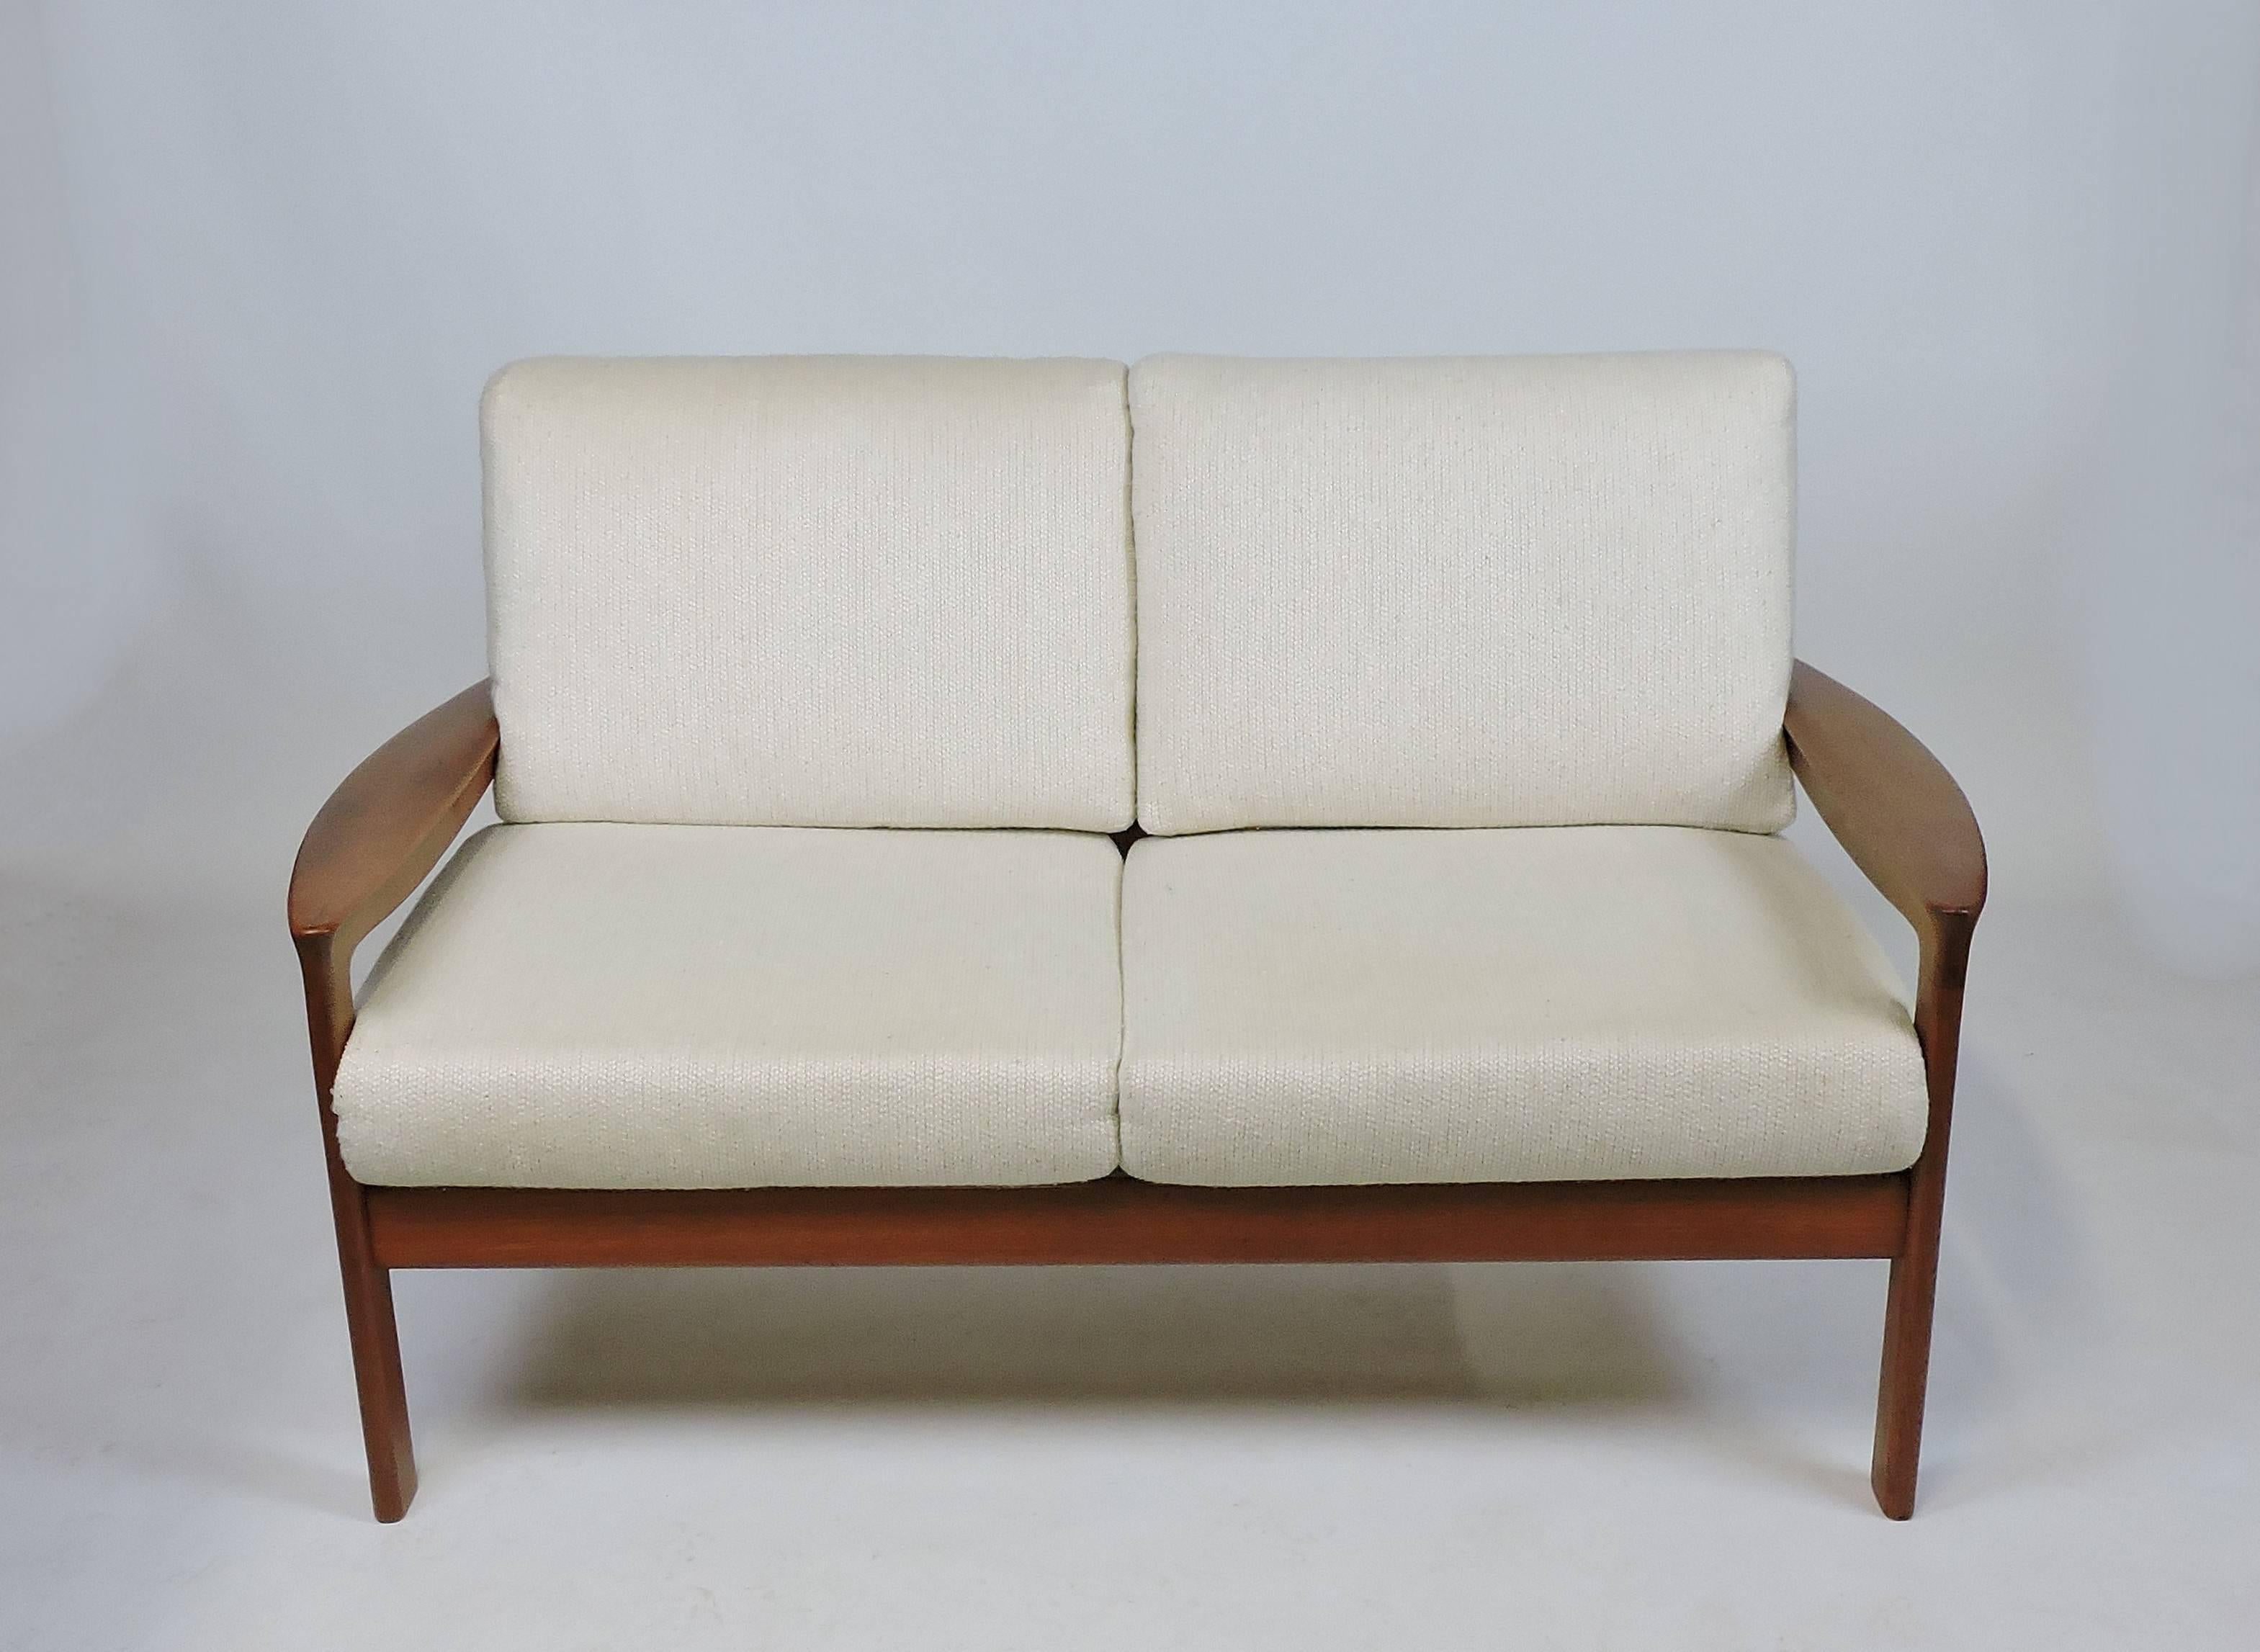 Beautiful and comfortable loveseat made by Komfort of Denmark. It has great craftsmanship with a sculpted solid teak frame with paddle arms, and a slat back. The zippered cushions have the original off-white textured upholstery. 
Unmarked. We also